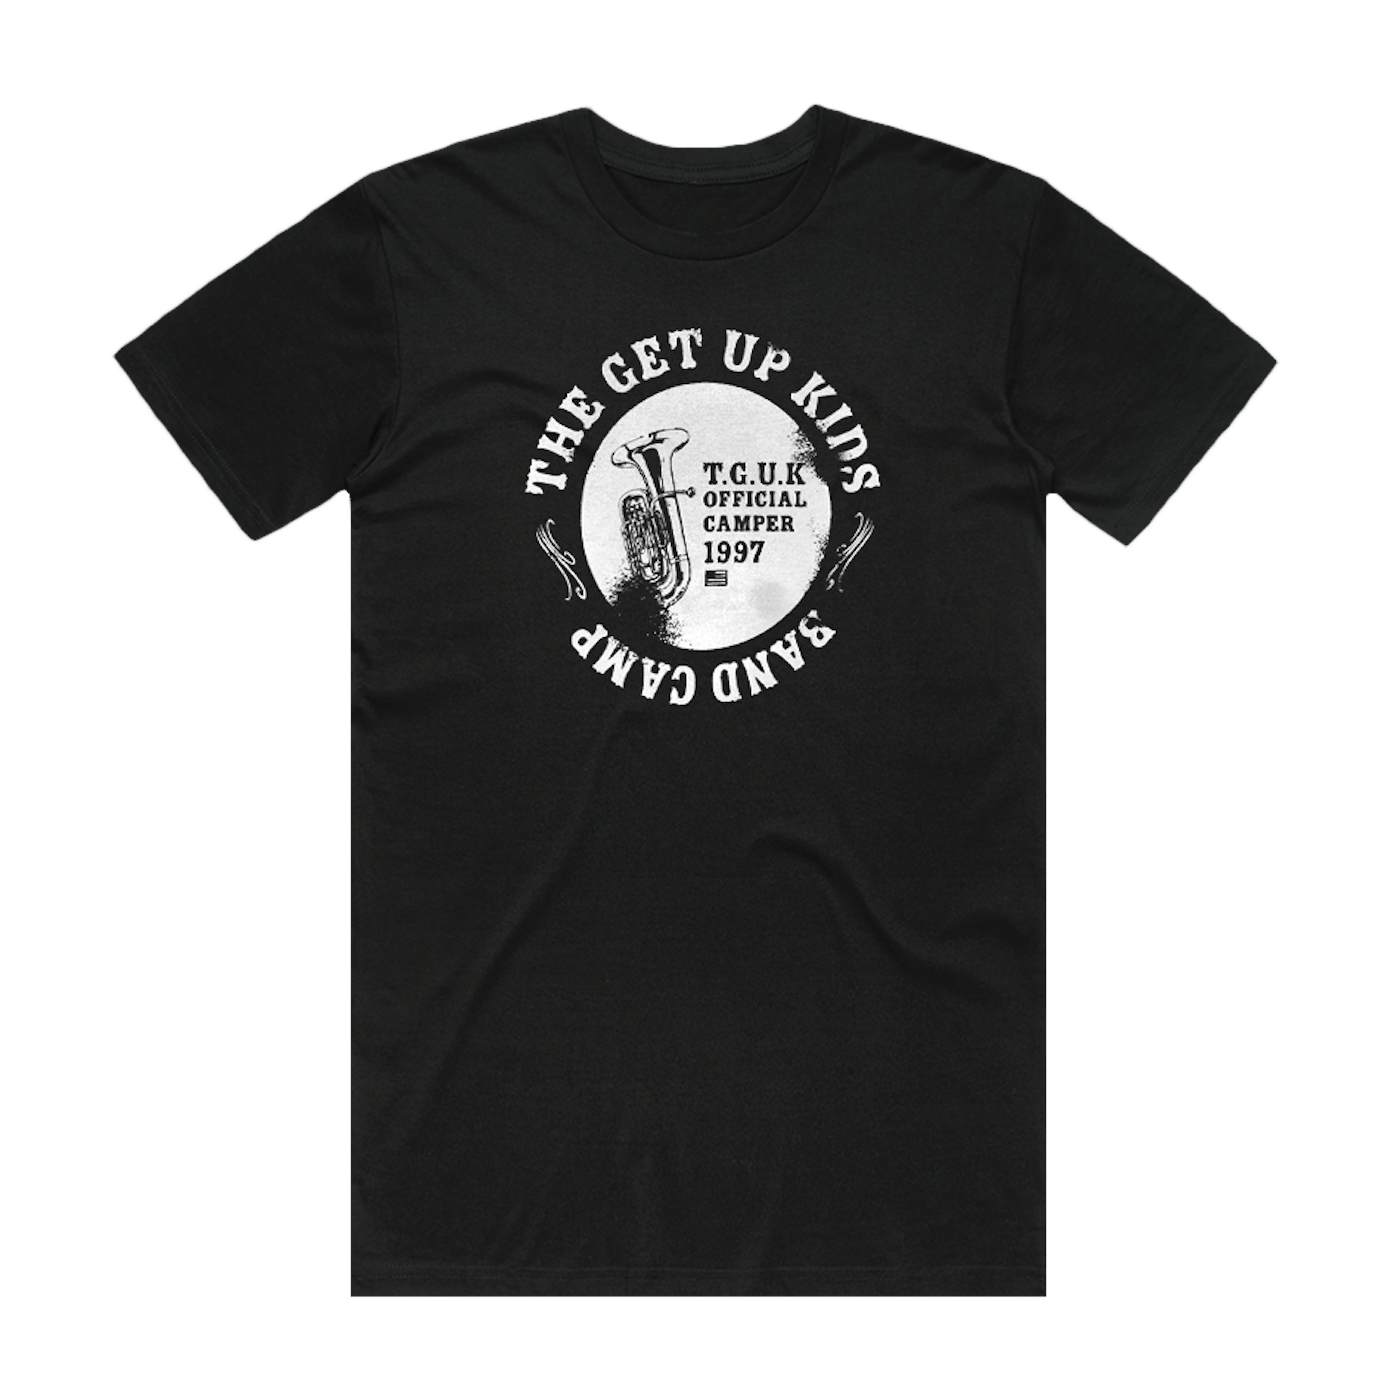 The Get Up Kids "Band Camp" T-Shirt